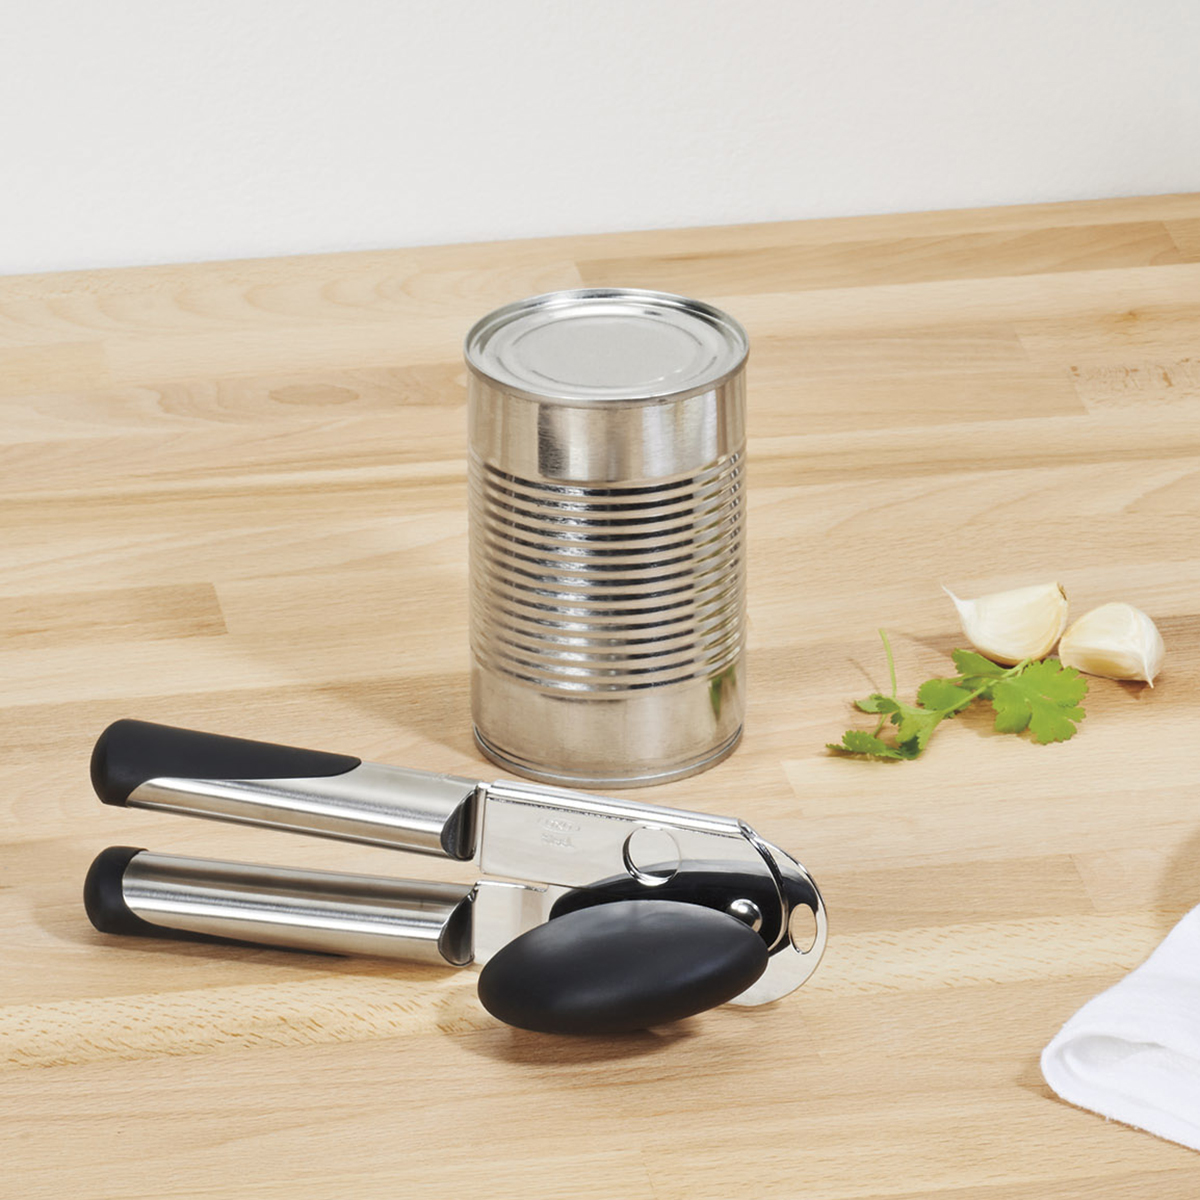 https://www.containerstore.com/catalogimages/424804/10086158-OXO-Steel-Can-Opener-VEN5.jpg